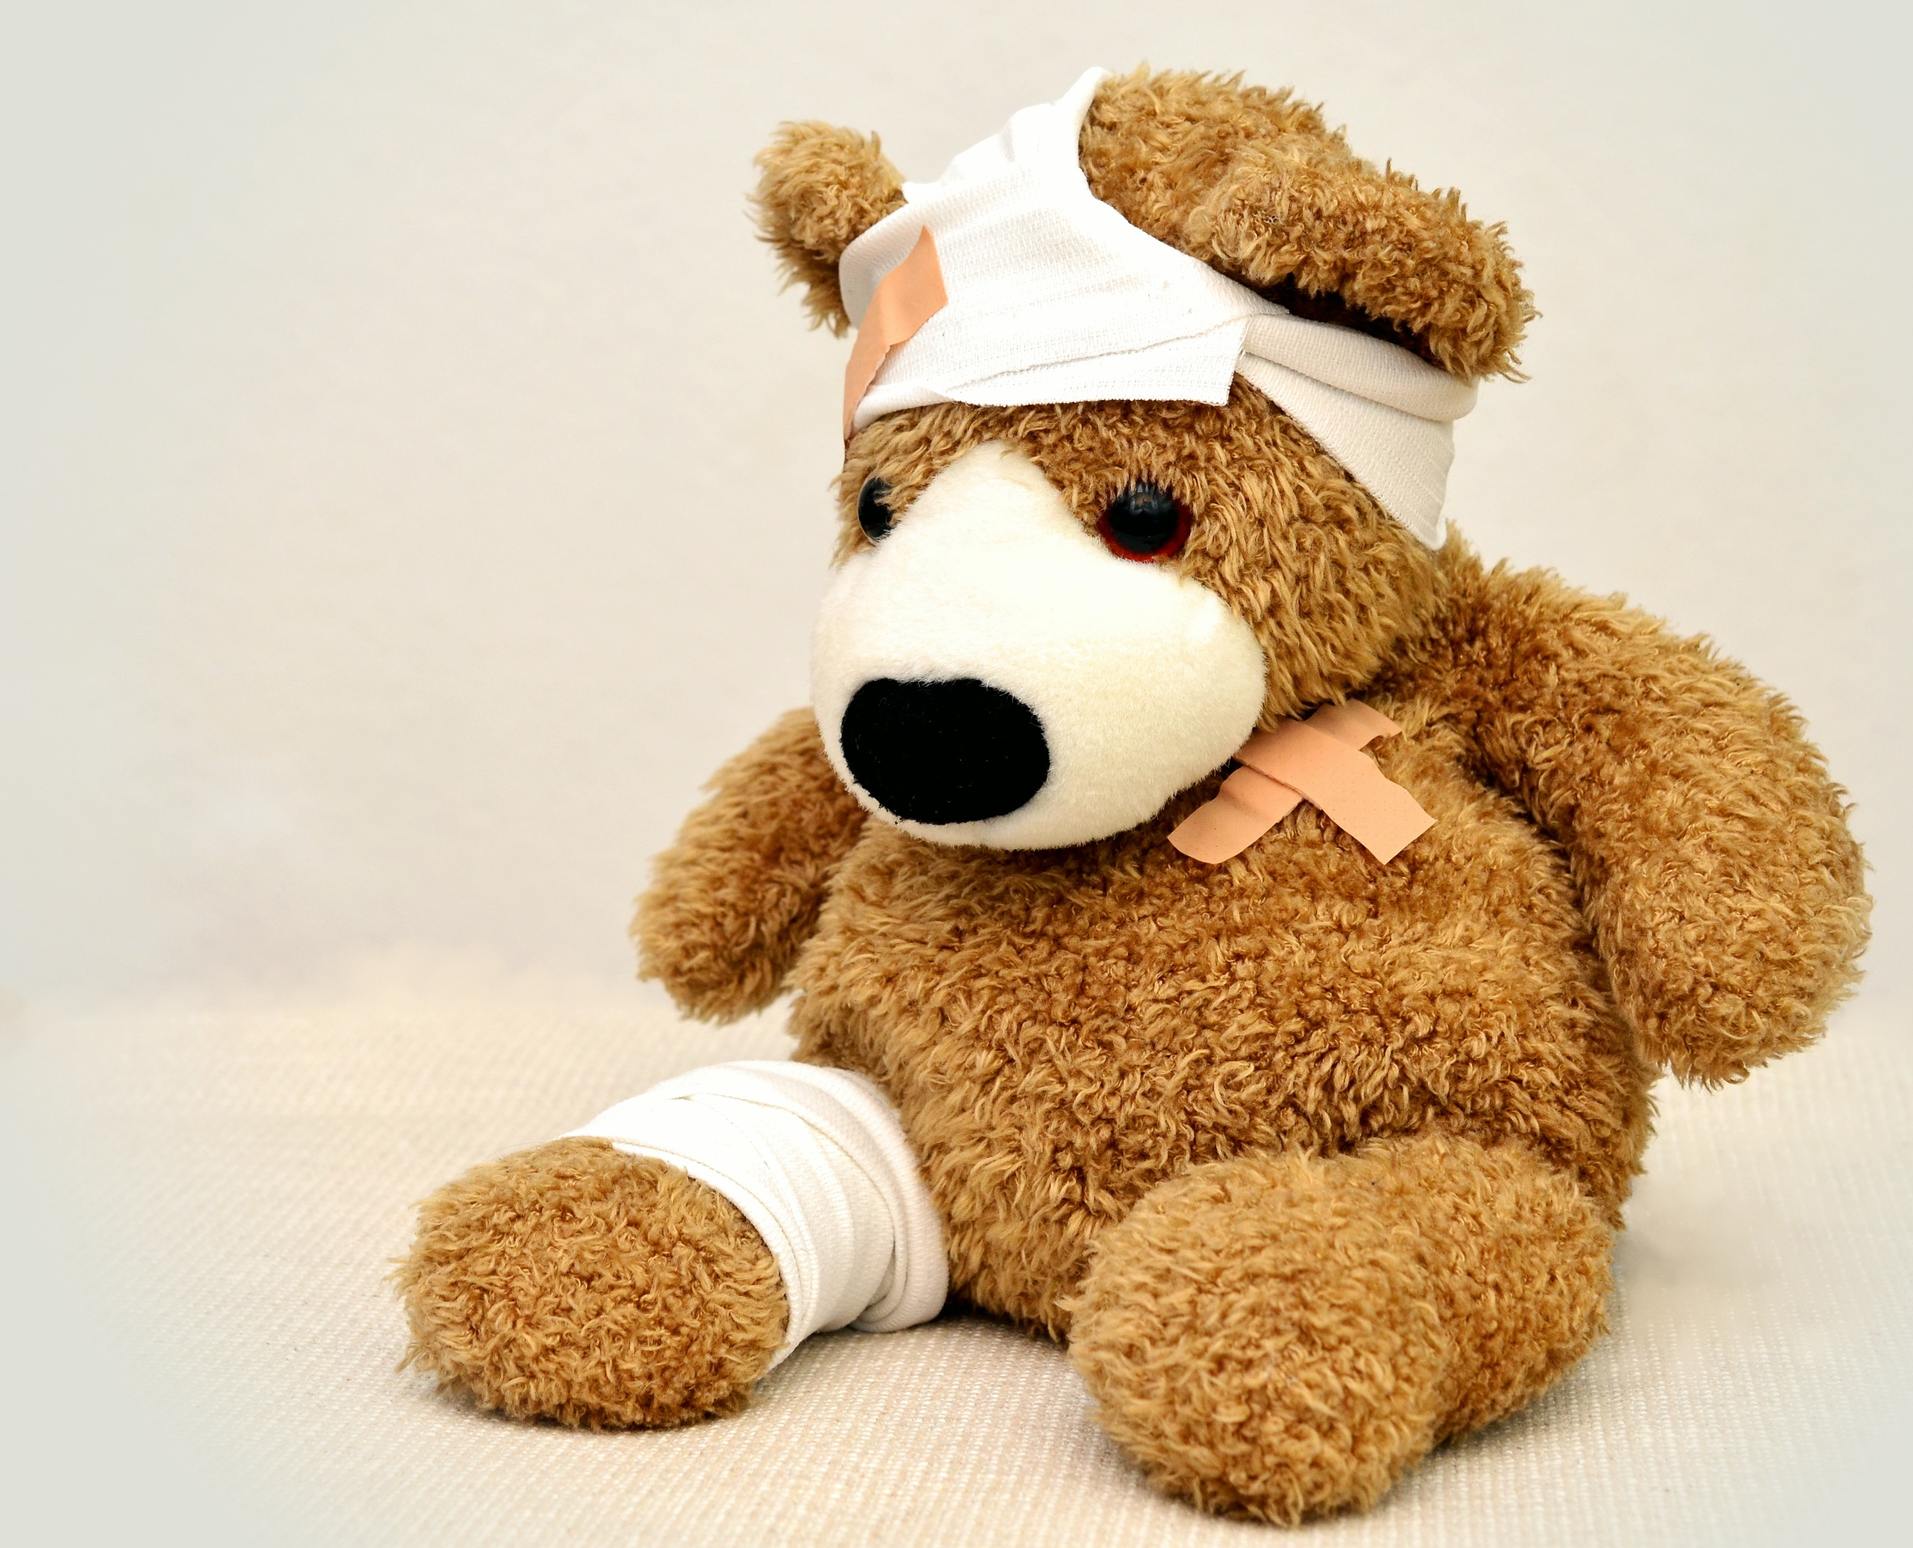 Teddy bear with bandages and bandaids